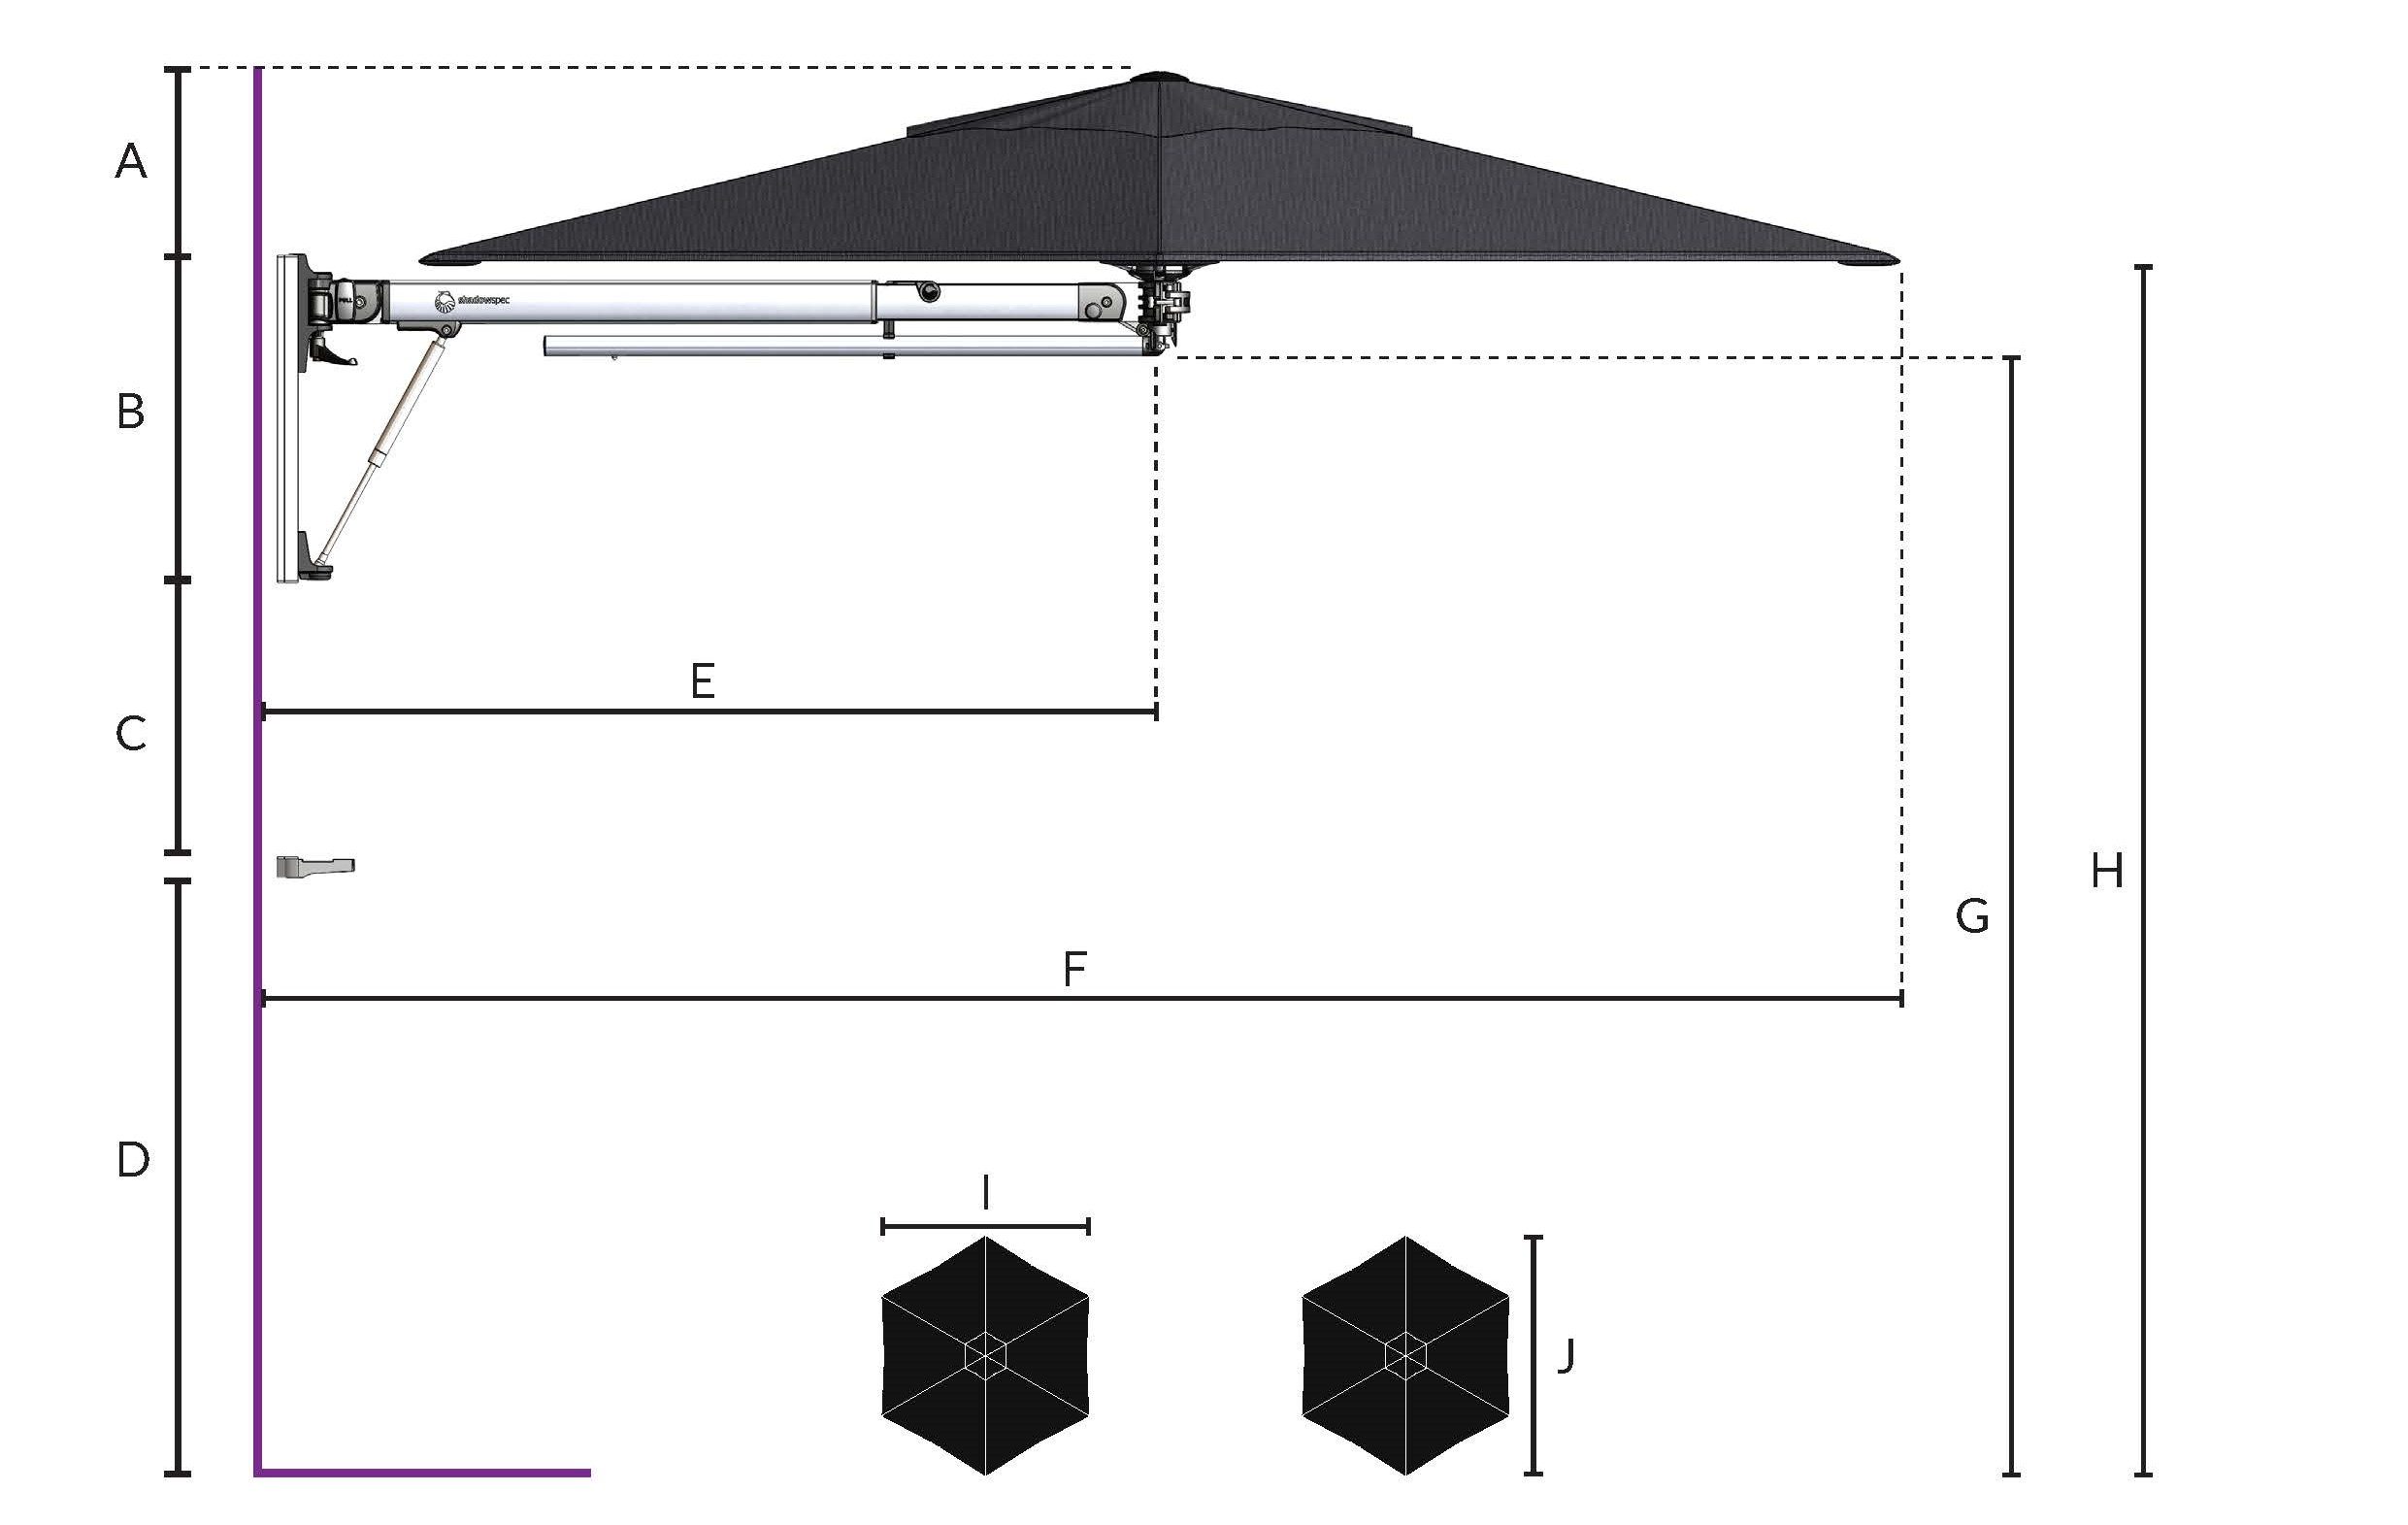 Wall mounted umbrella sizes and configurations